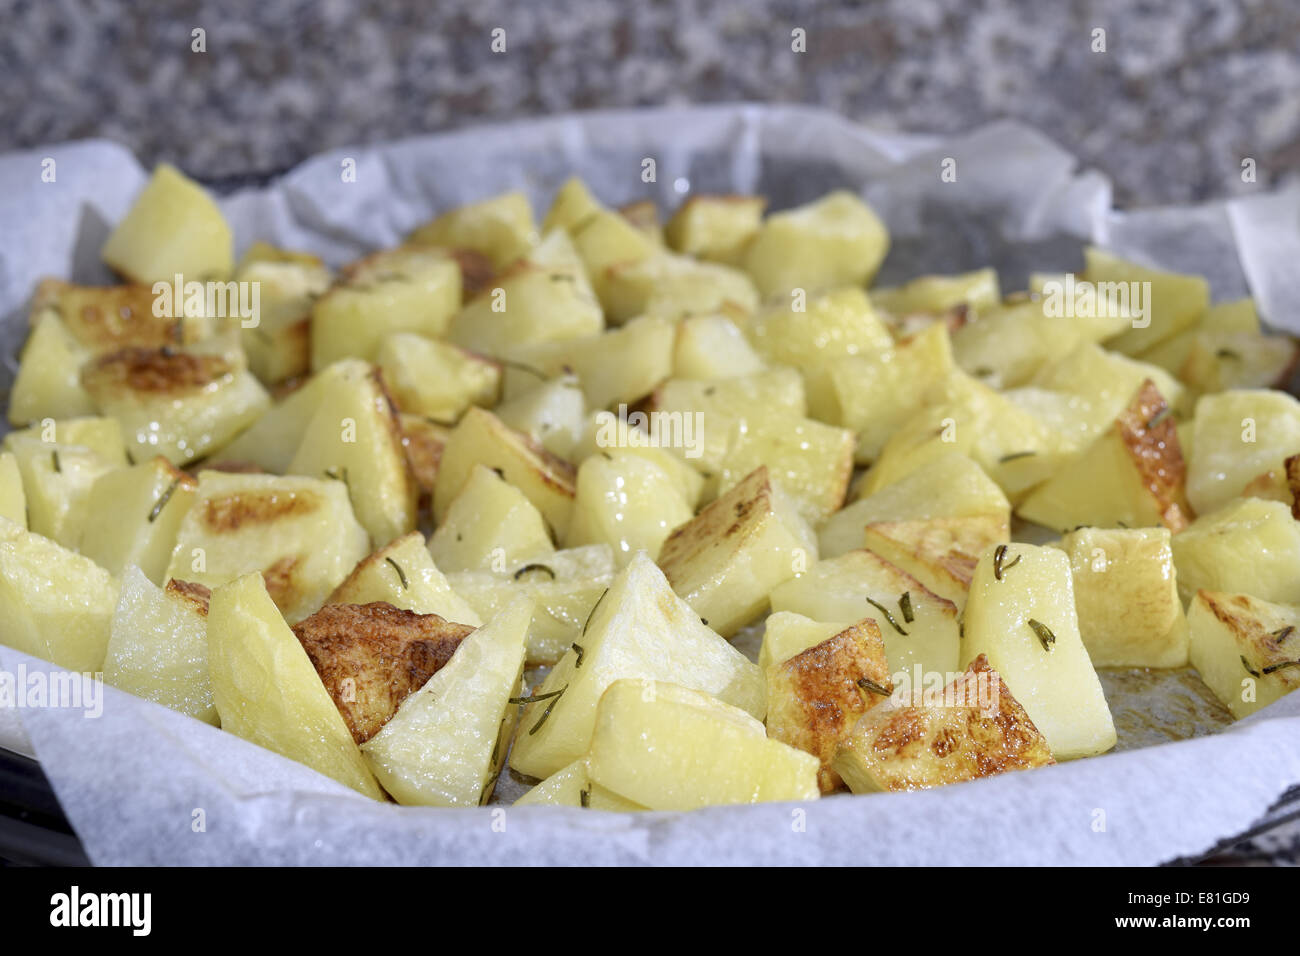 grilled potatoes Stock Photo